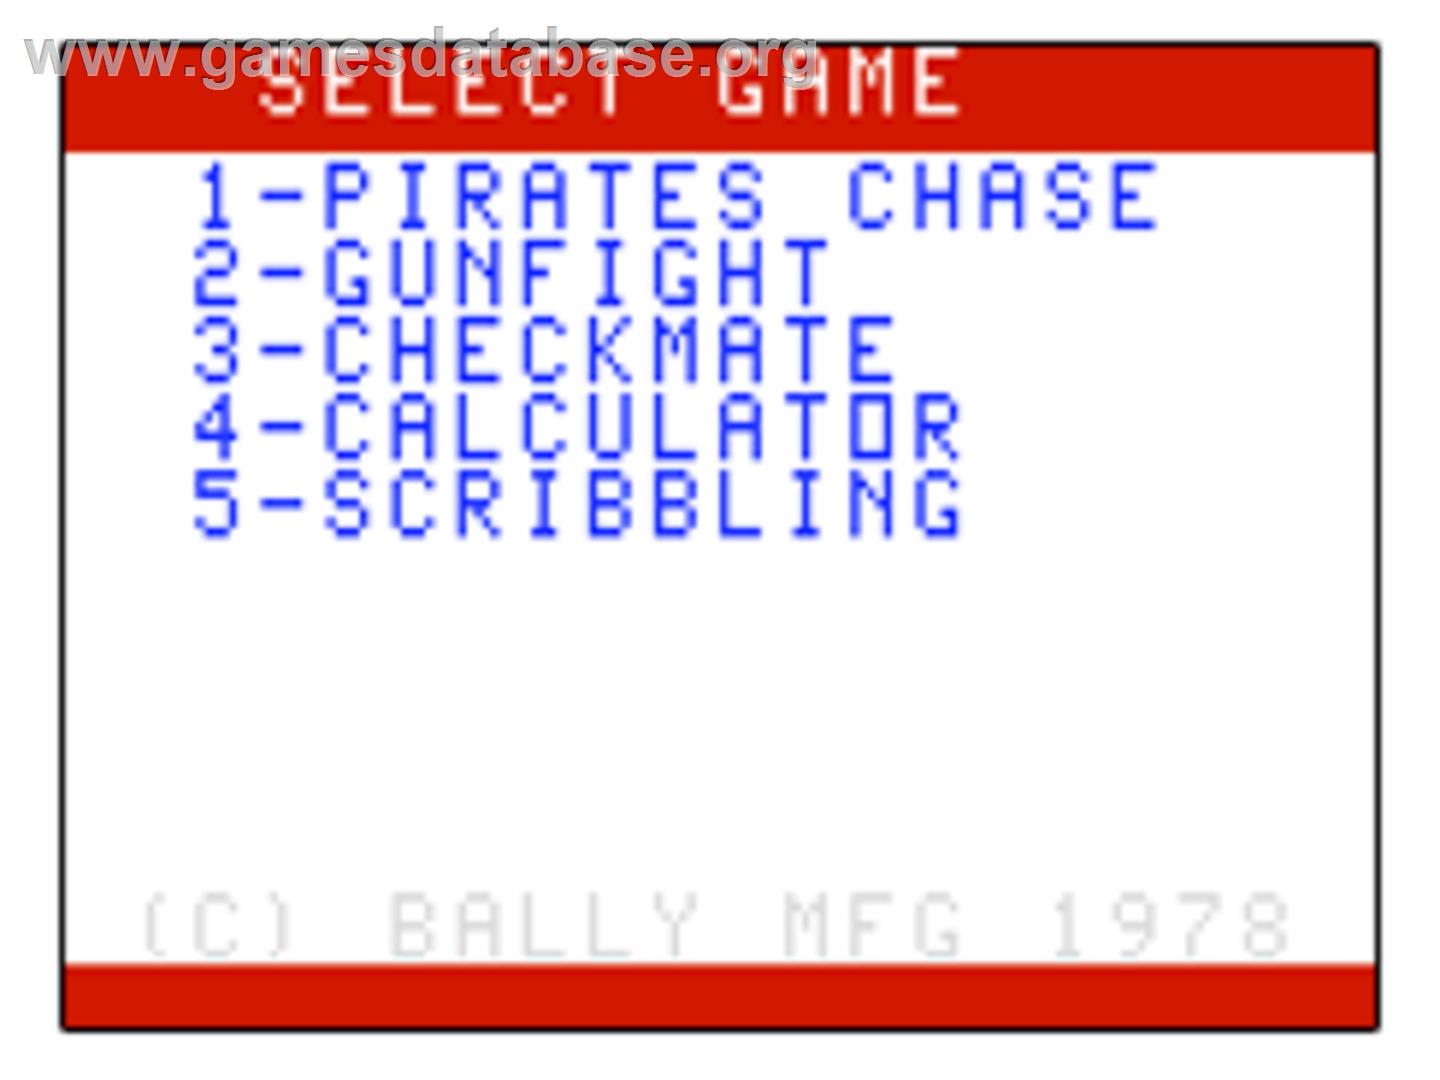 Pirate's Chase - Bally Astrocade - Artwork - Title Screen